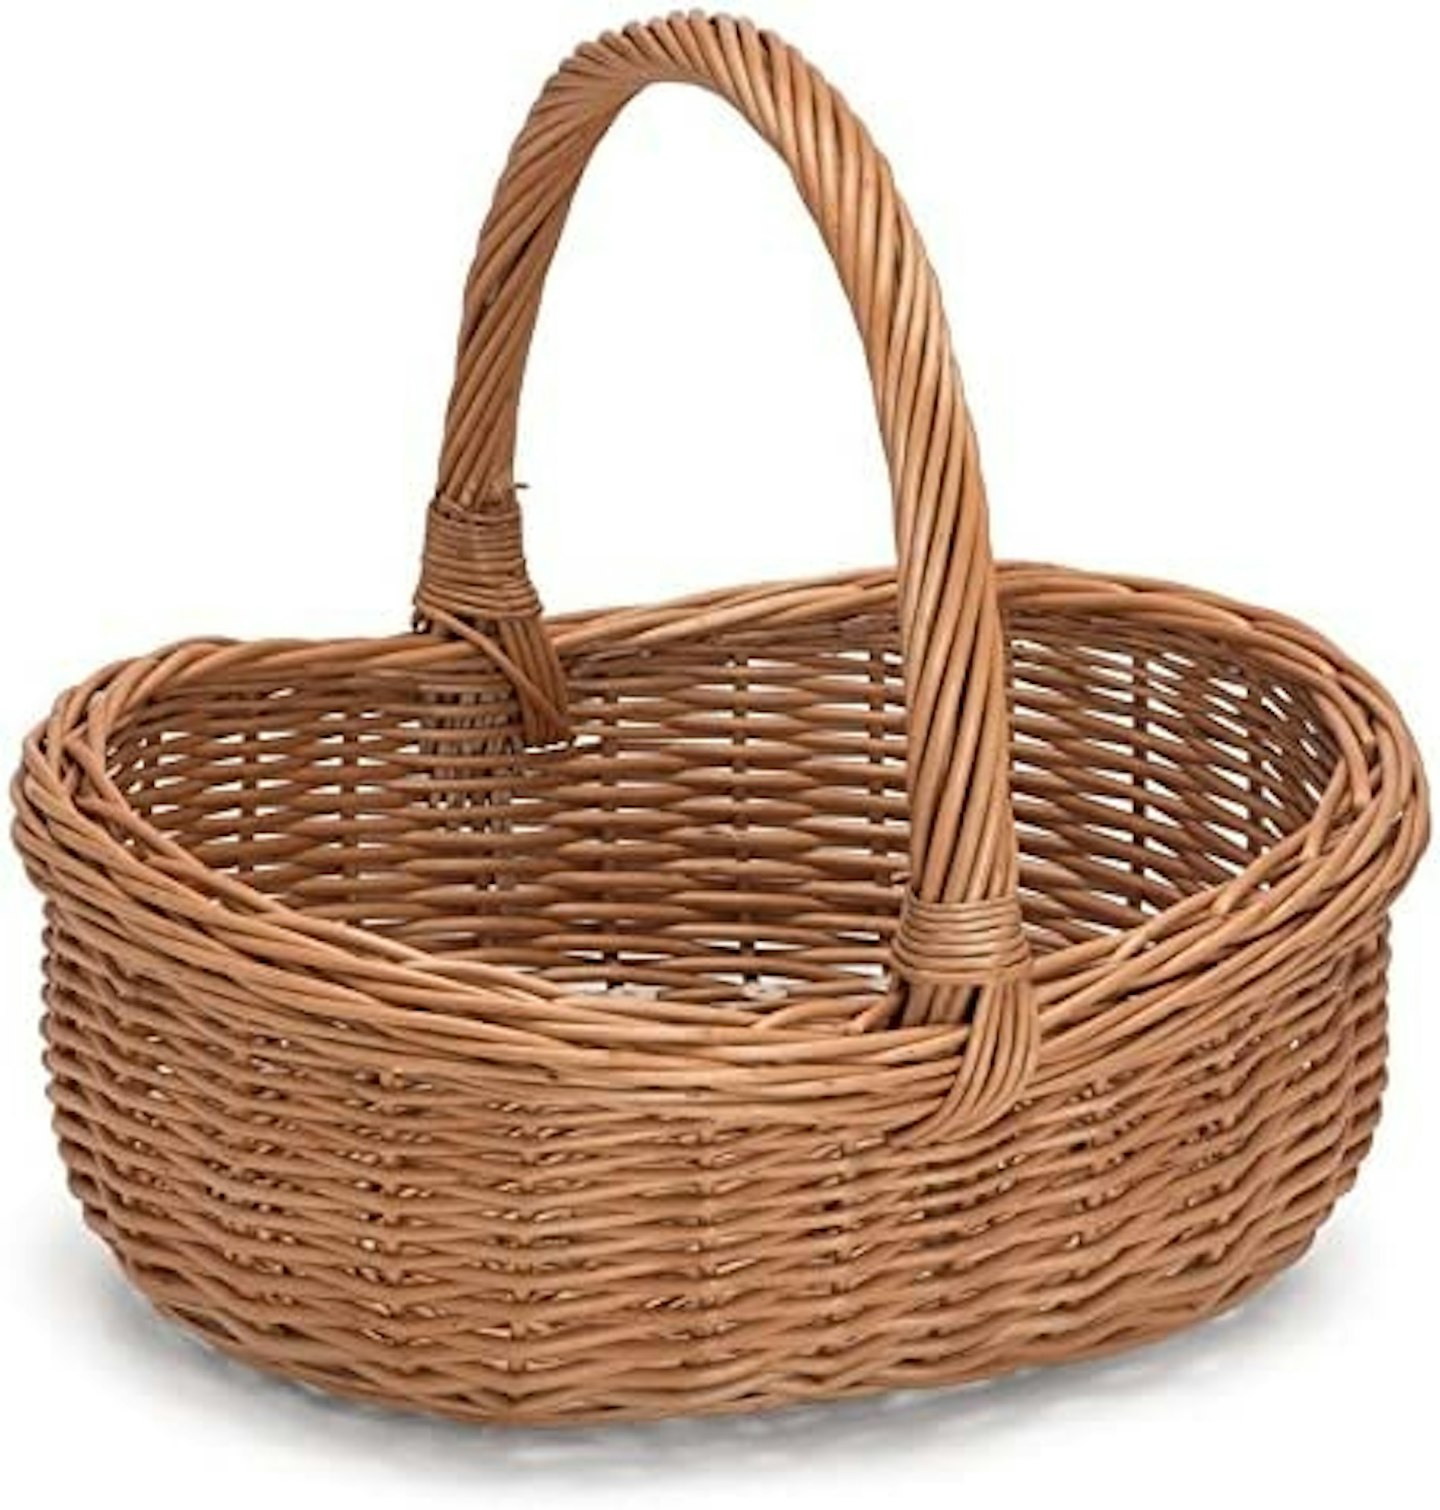 Prestige Wicker Willow Basket with Handle, Natural, 43x36x35 cm